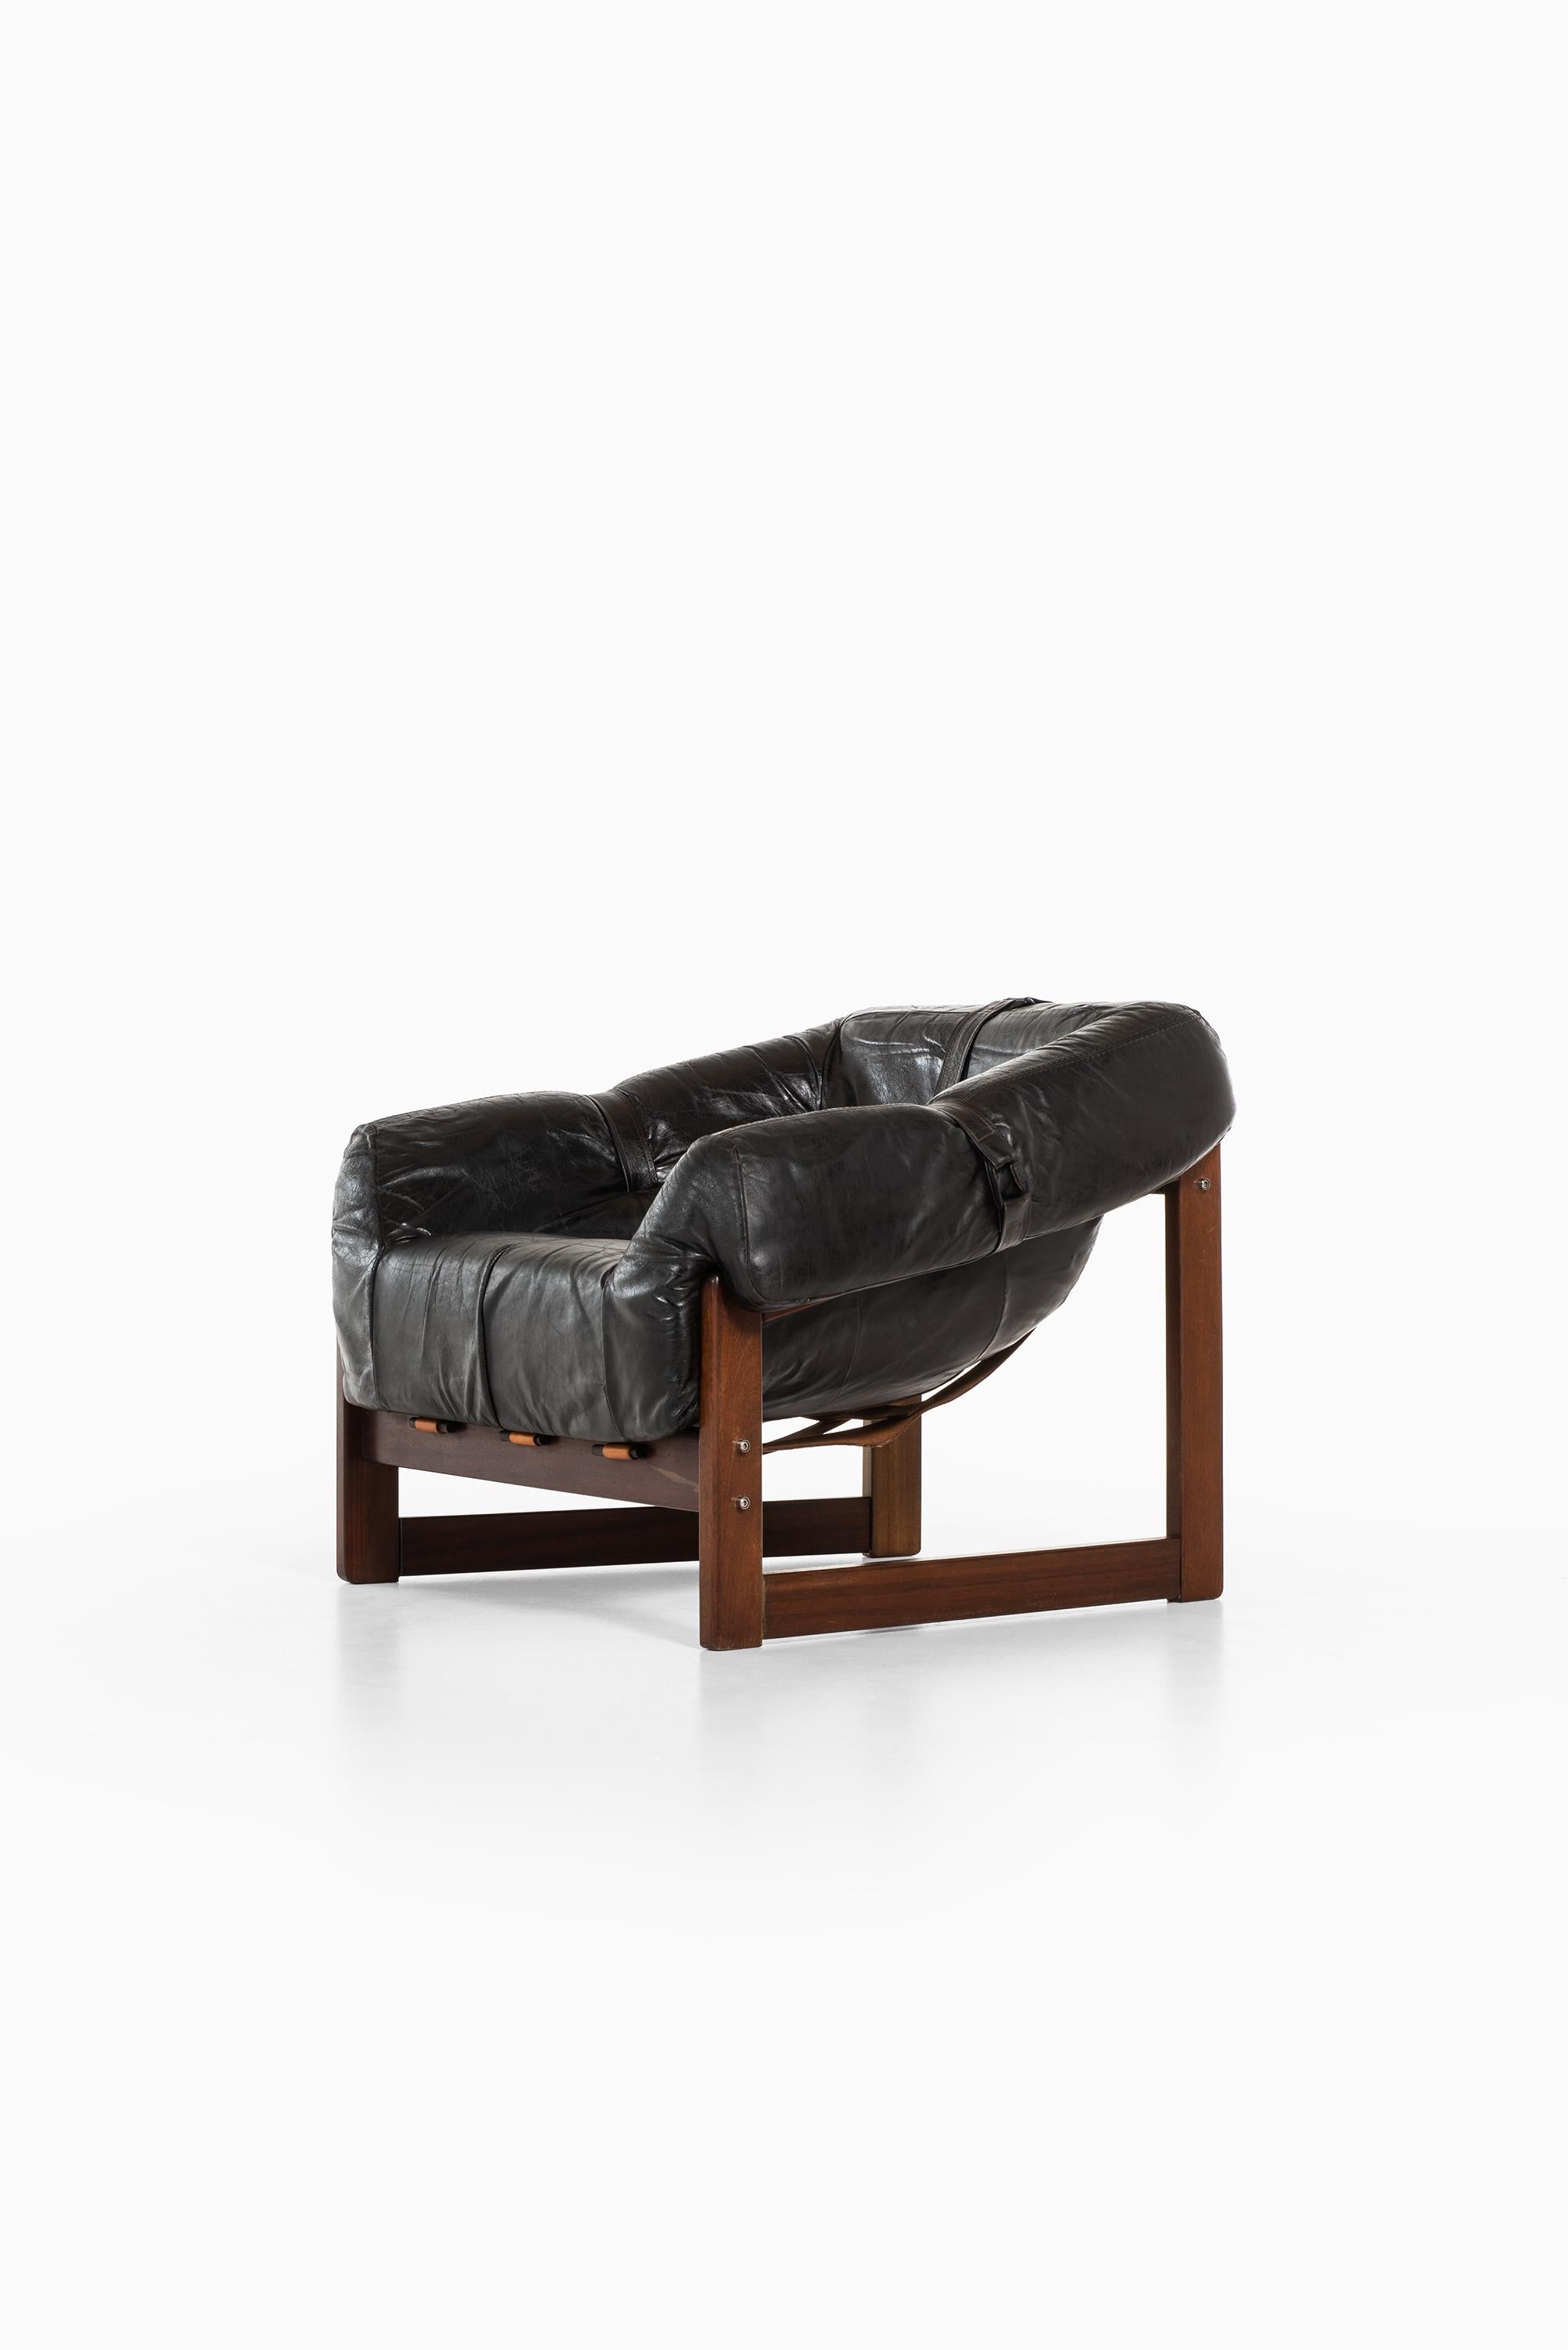 Leather Percival Lafer Seating Group Model MP-091 Produced by Lafer MP in Brazil